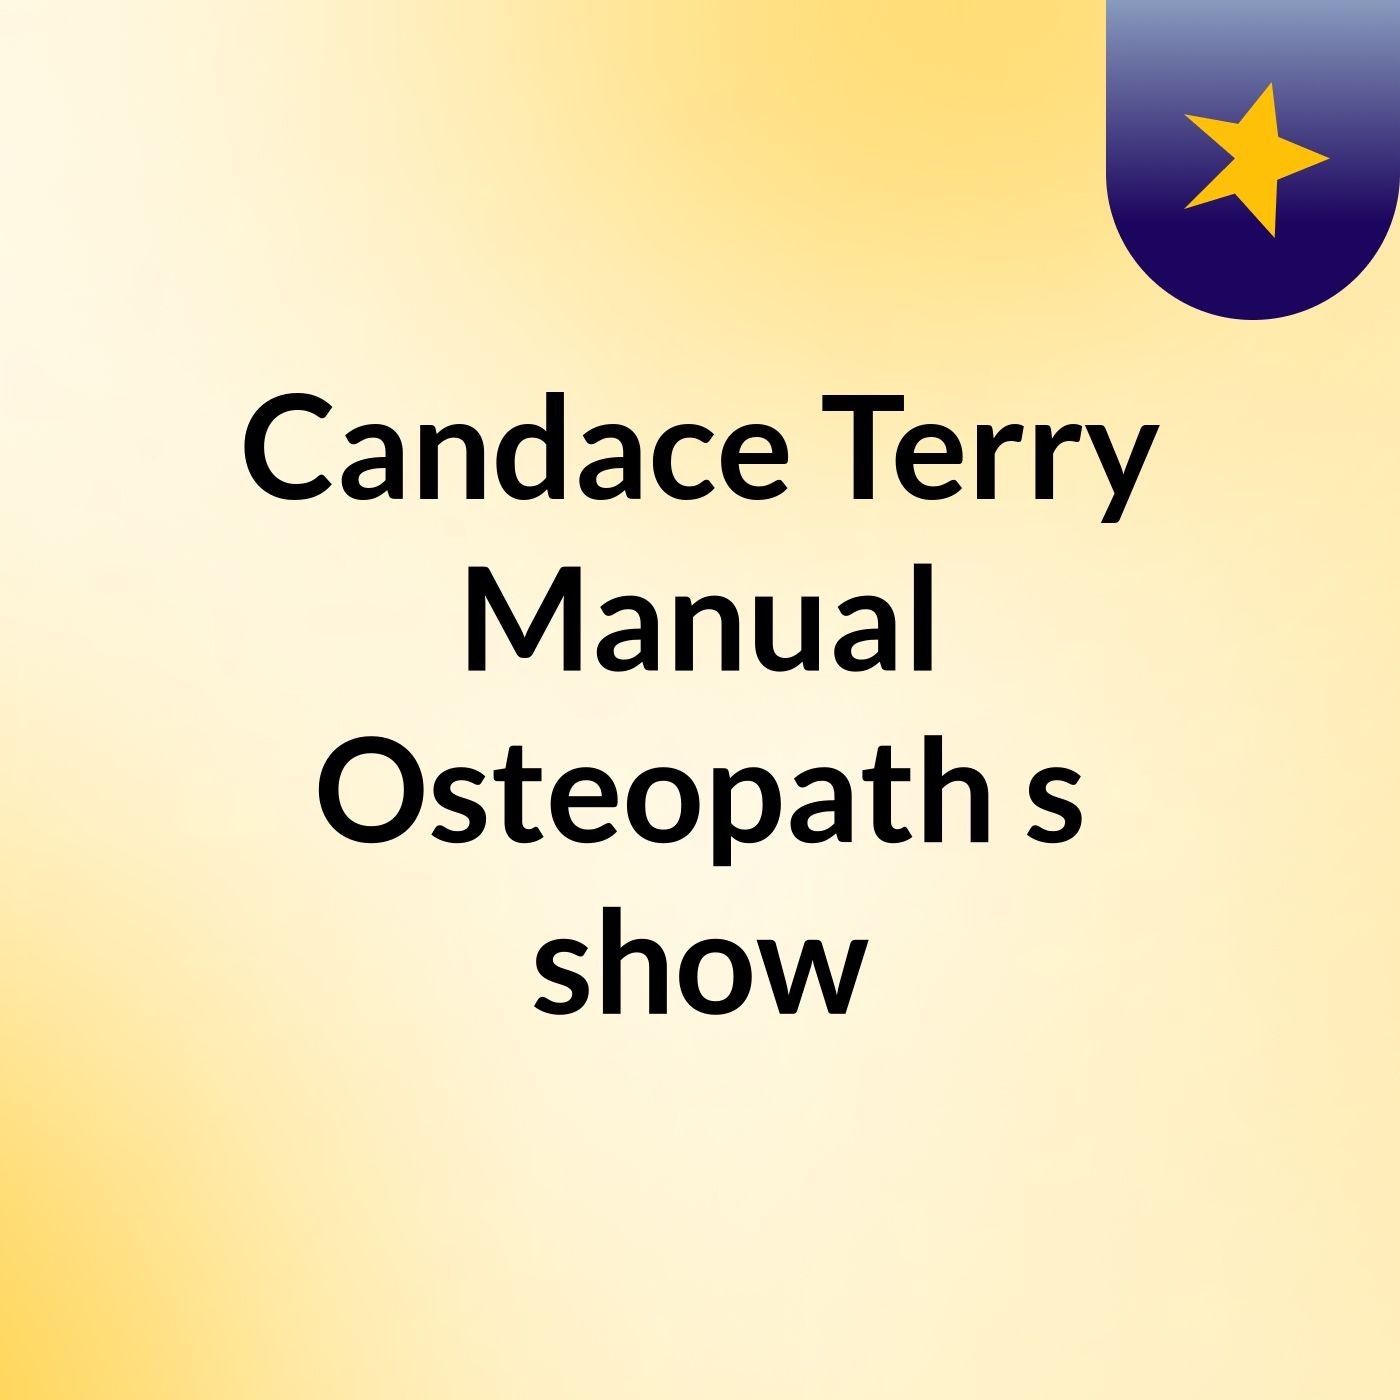 Candace Terry Manual Osteopath's show